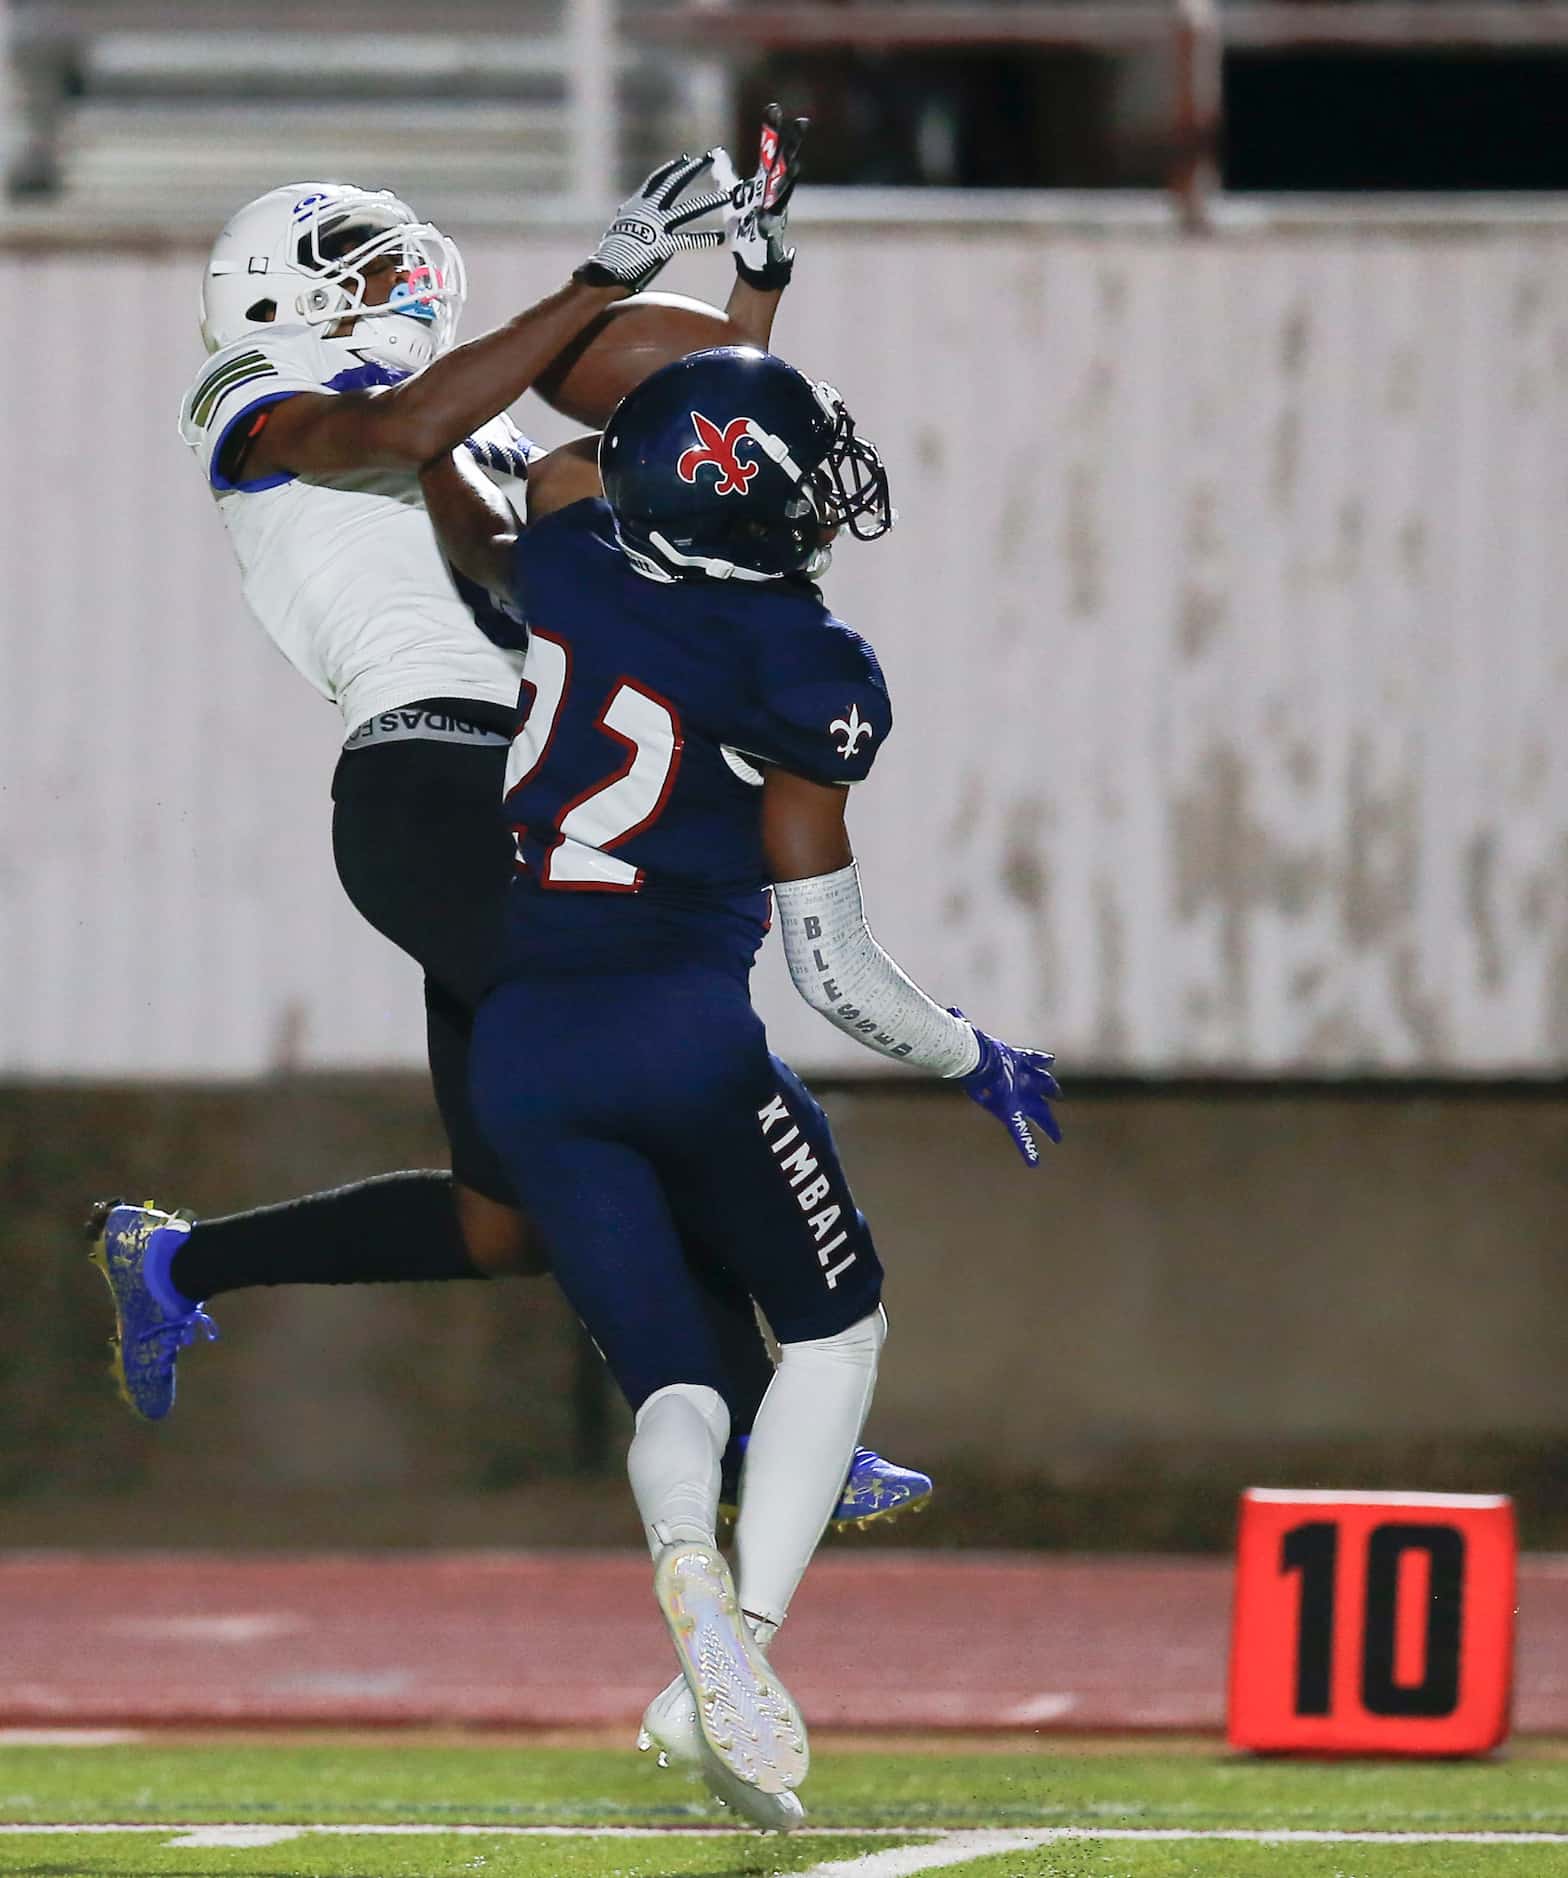 Conrad senior Tony King, left, is unable to make the catch as Kimball sophomore cornerback...